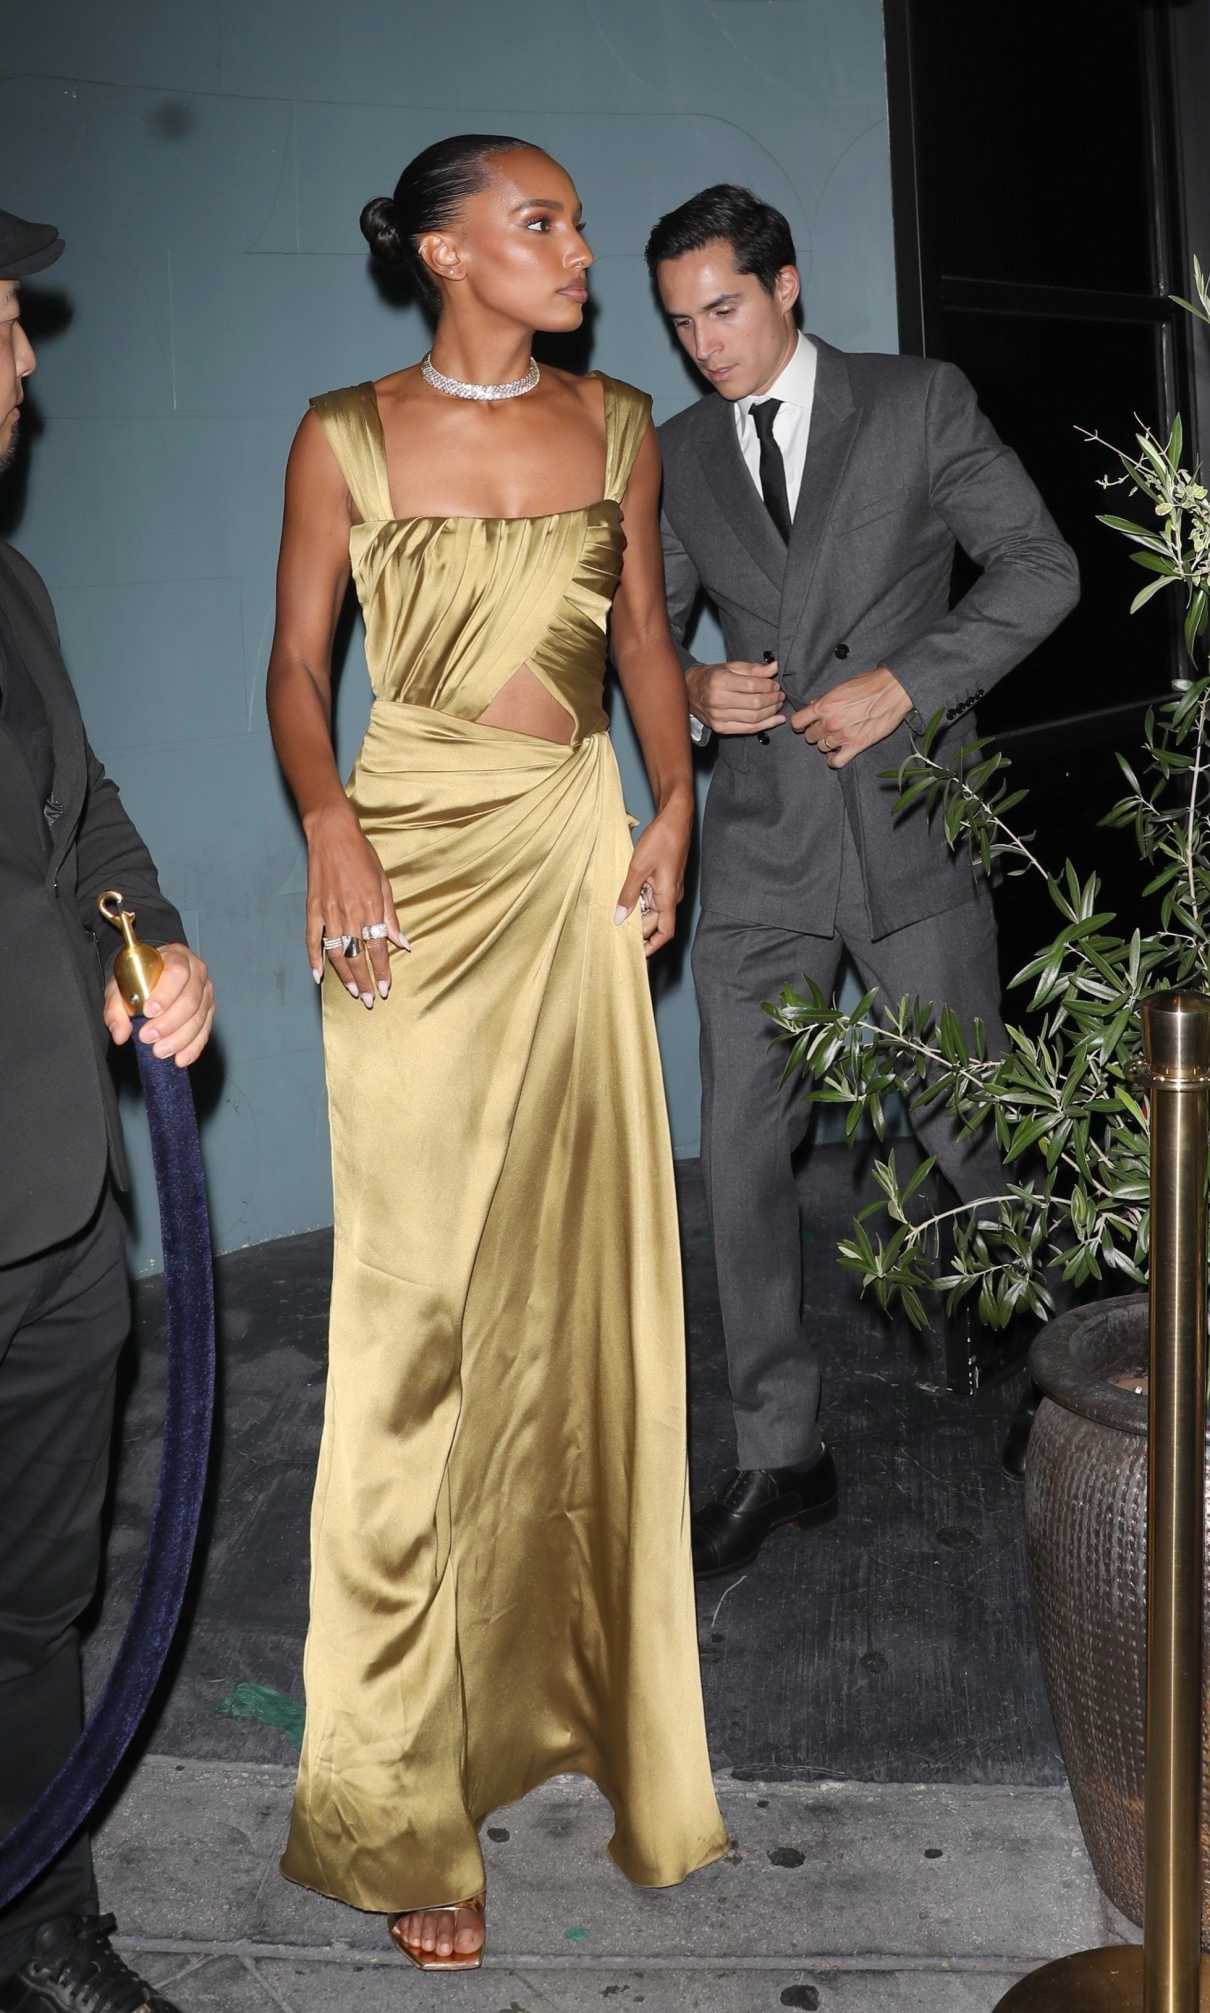 Jasmine Tookes in a Gold Dress